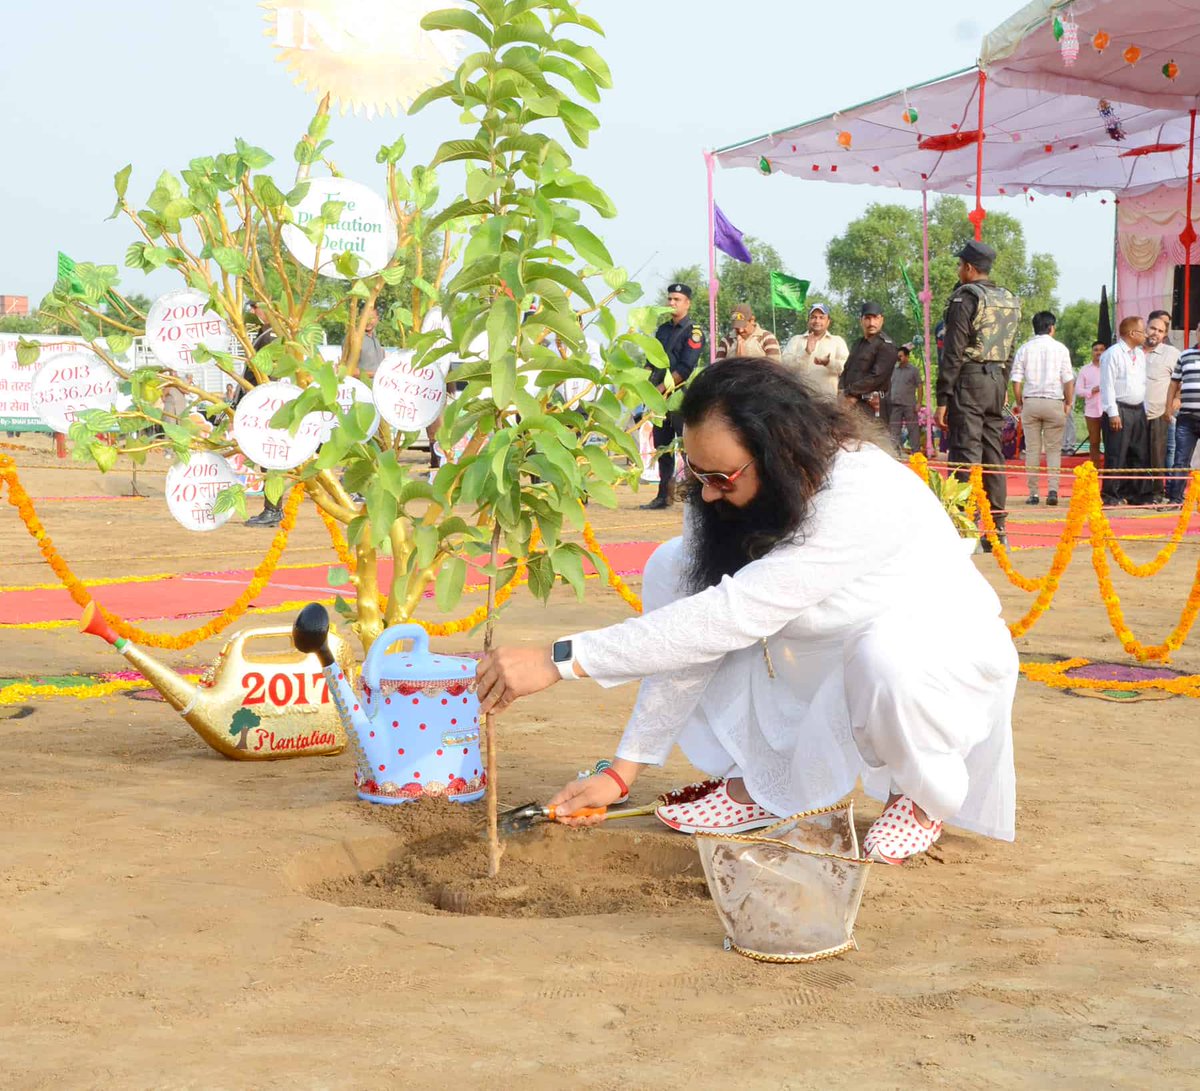 #GoGreen 
Spreading awareness regarding the woes of nature and rampant industrialization and deforestation Saint Ram Rahim believes to save nature by planting more and more trees under the Nature Campaign.